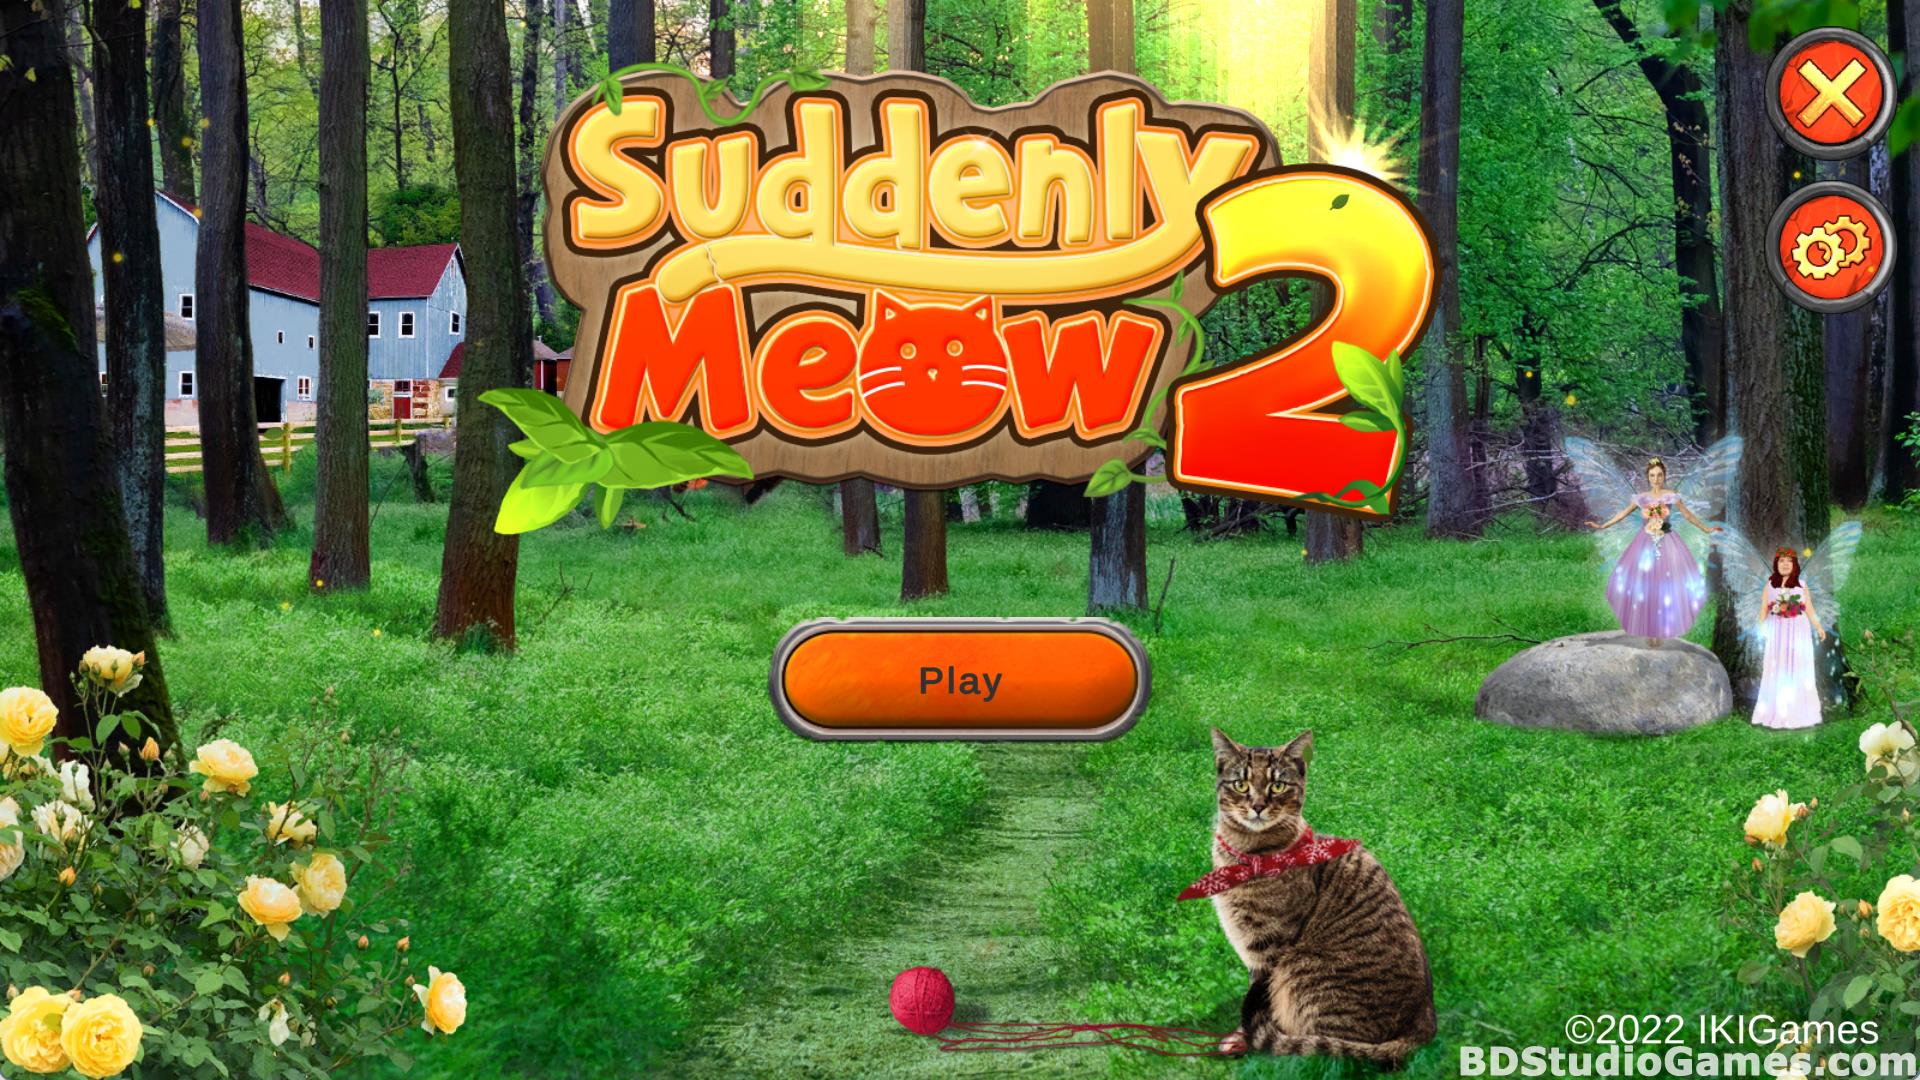 Suddenly Meow 2 Free Download Screenshots 01